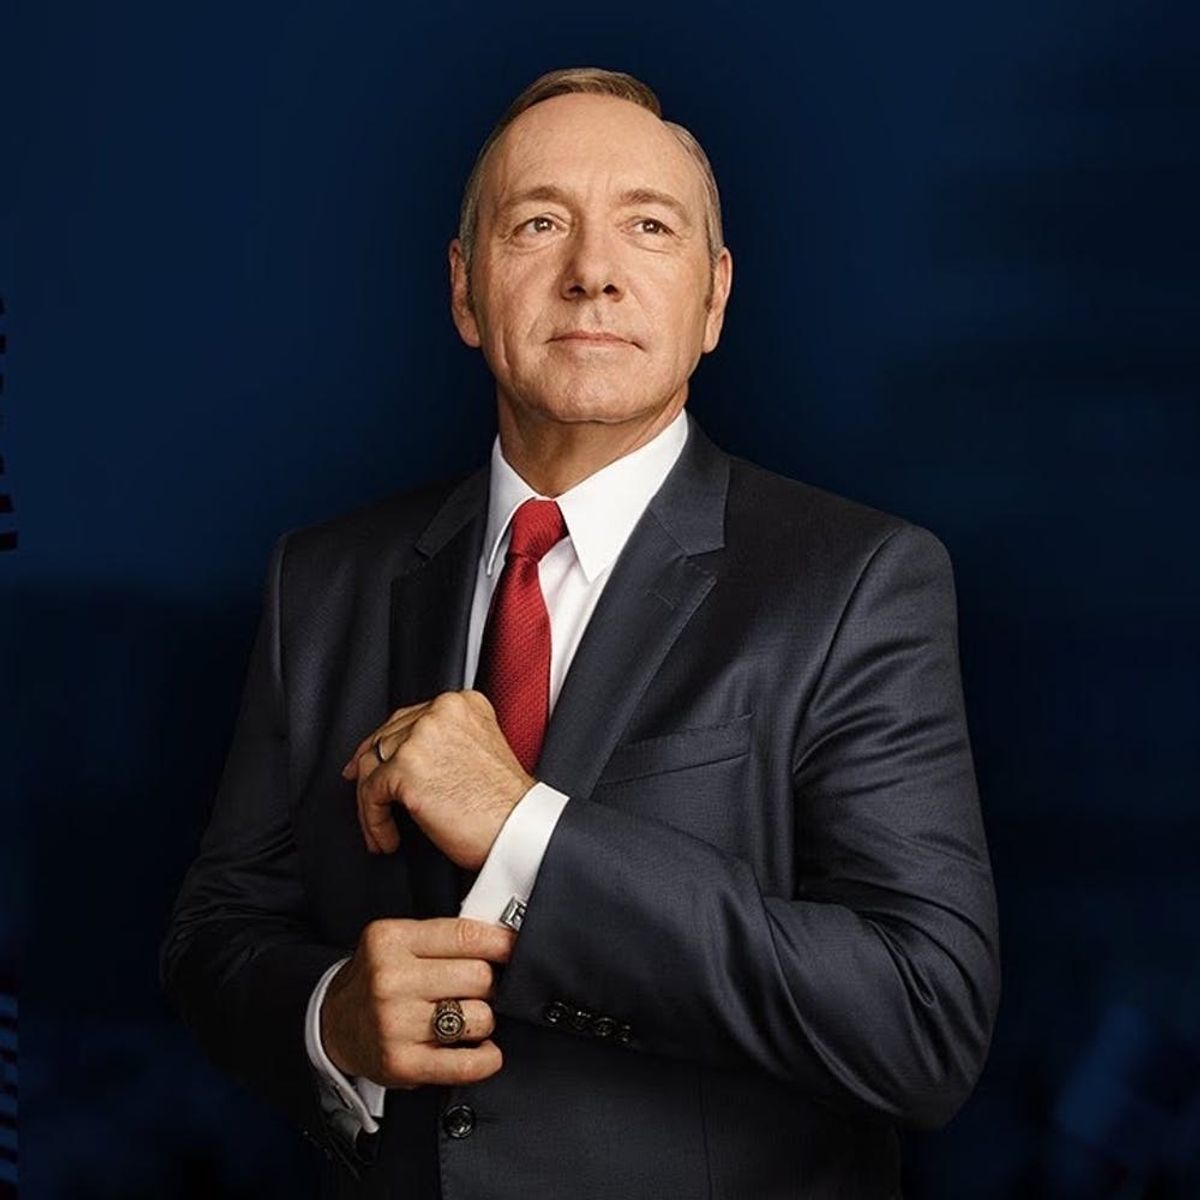 4 Shows to Watch After You Finish Bingeing House of Cards